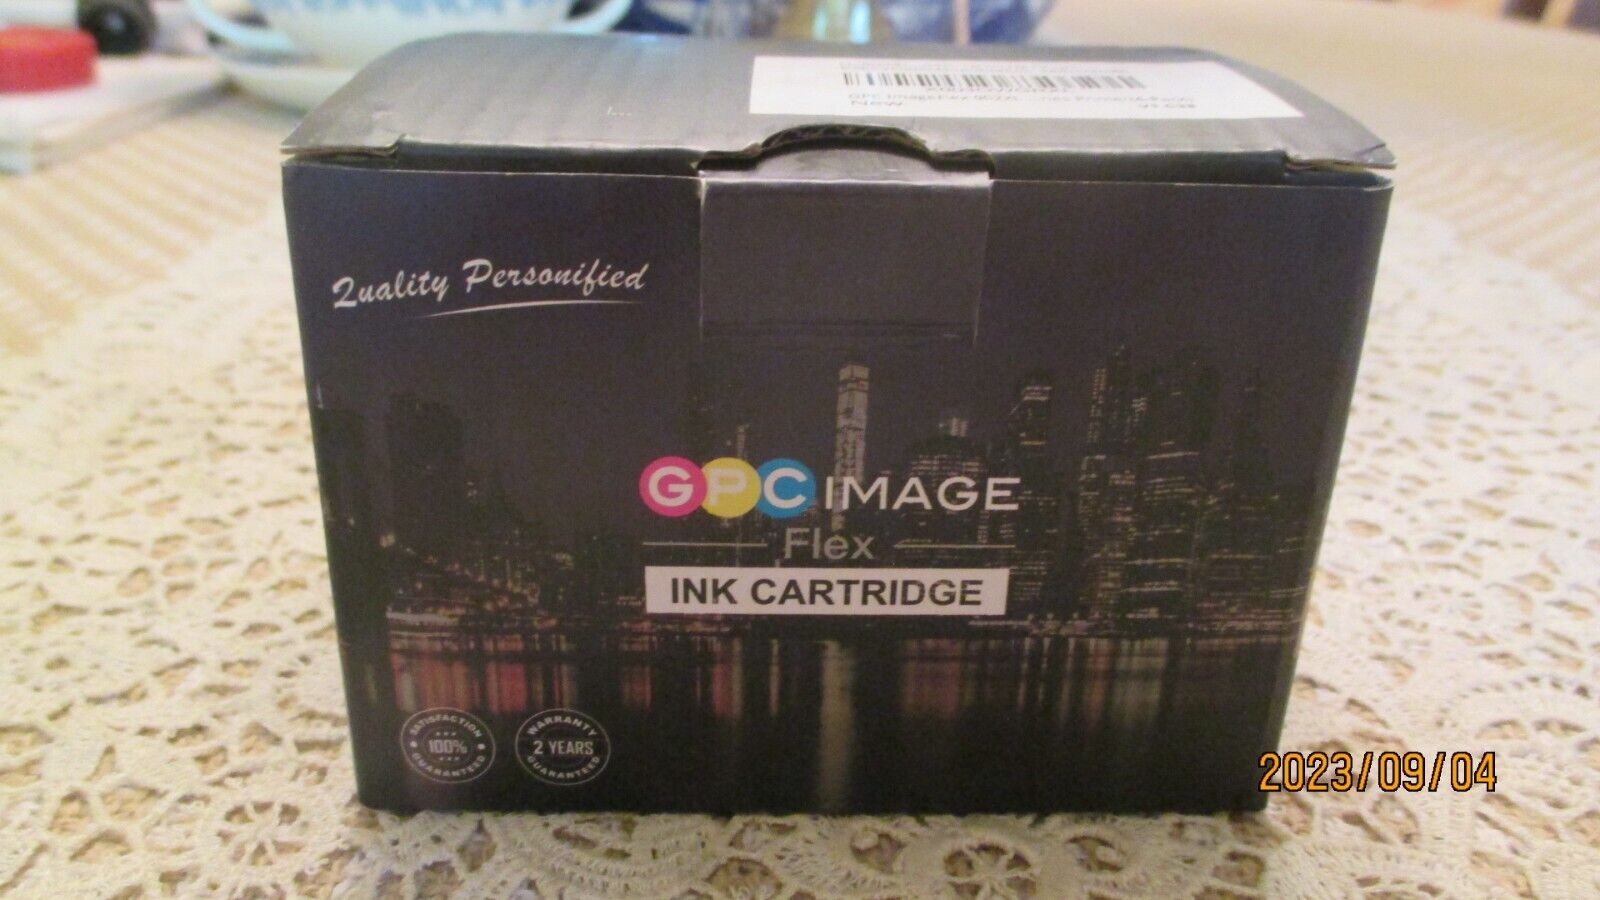 New In Box Sealed GPC Image Multi Pak For HP 902XL Black Cyan Mag. Yelo  Exp. 25